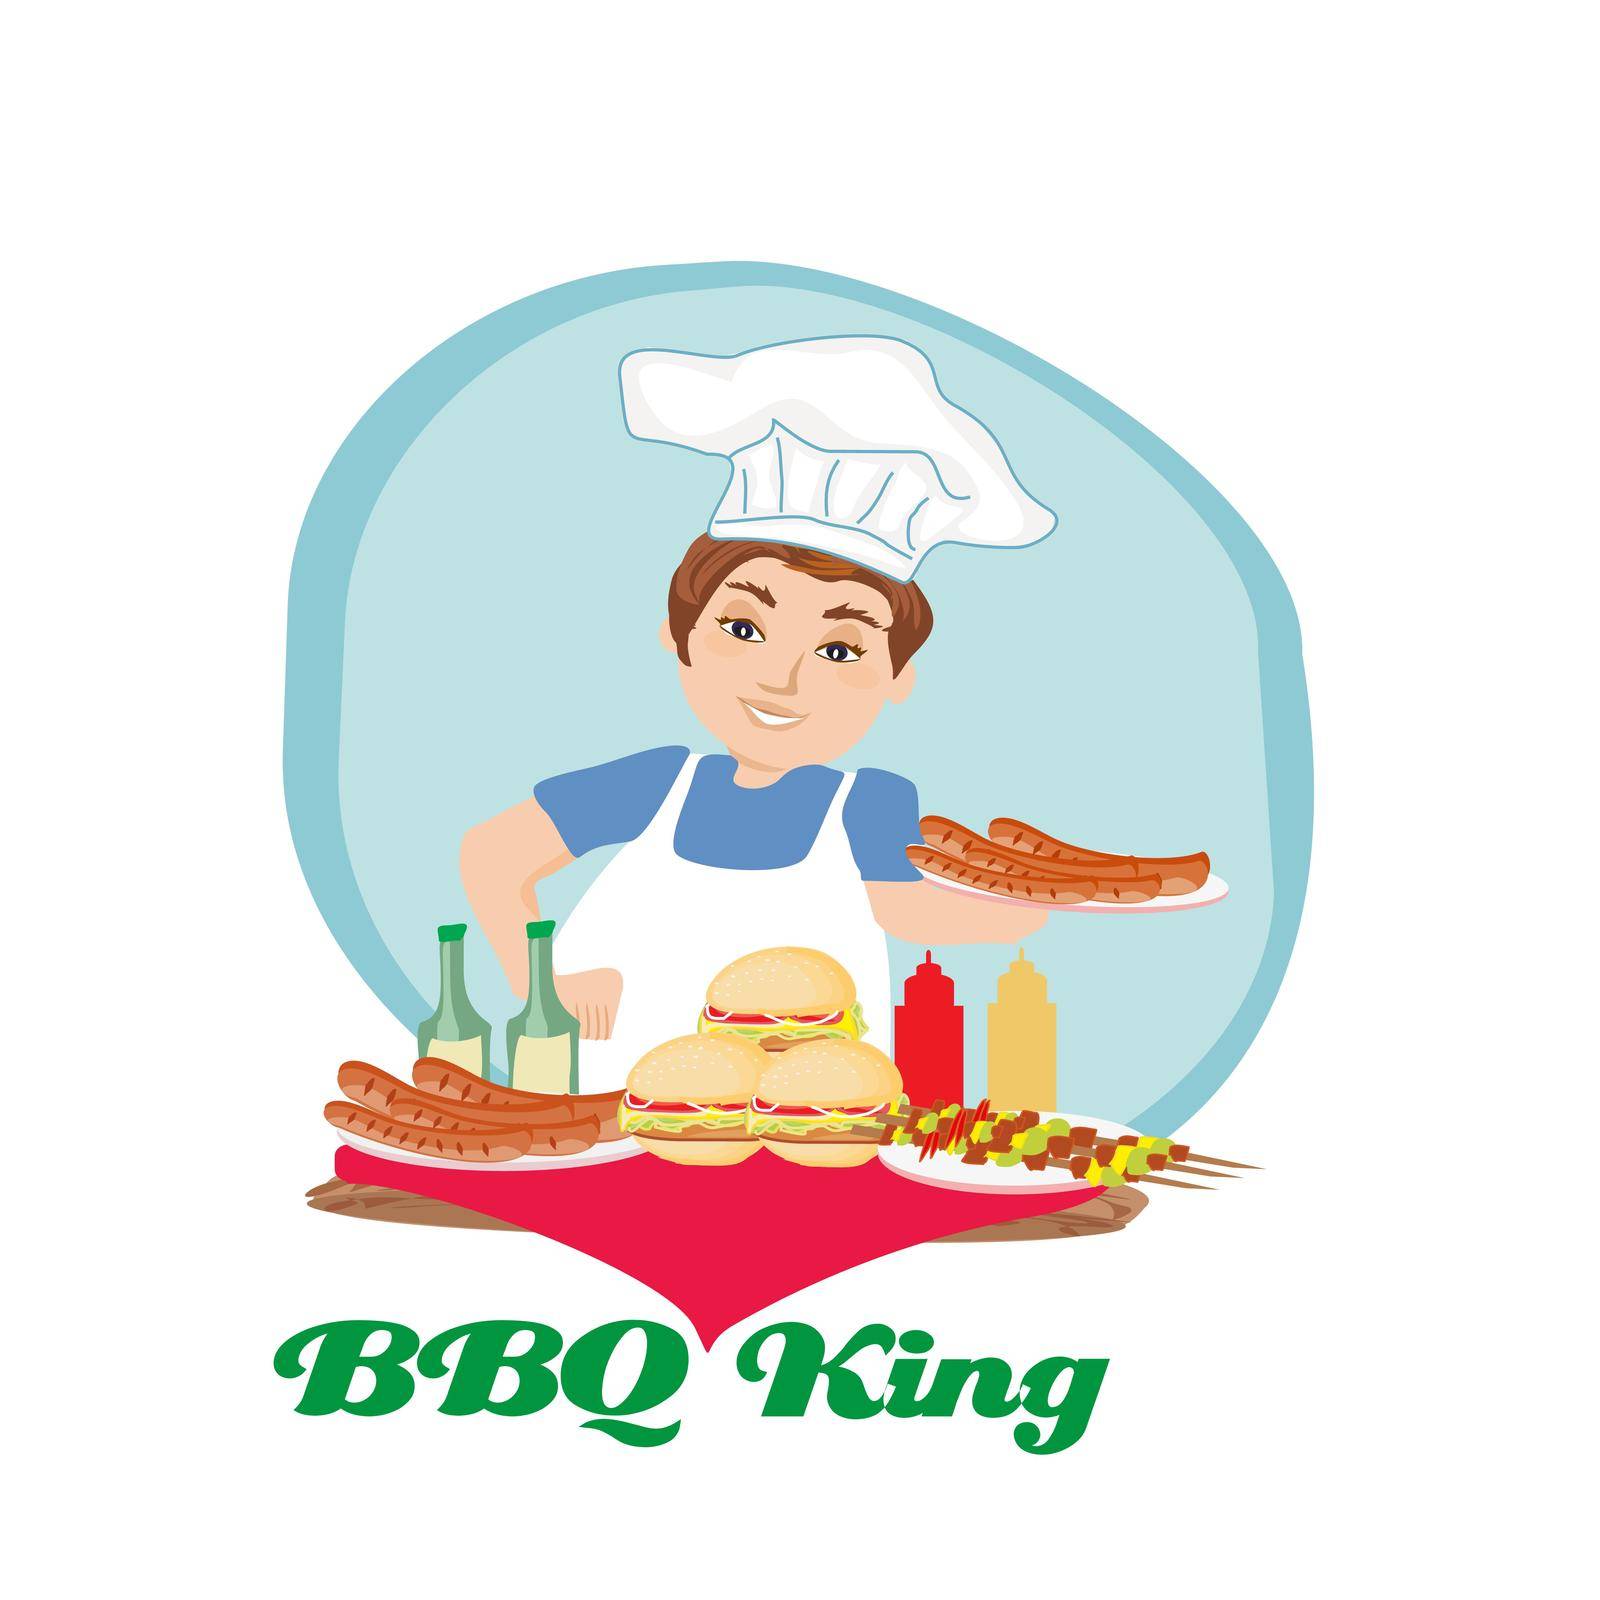 BBQ king by JackyBrown